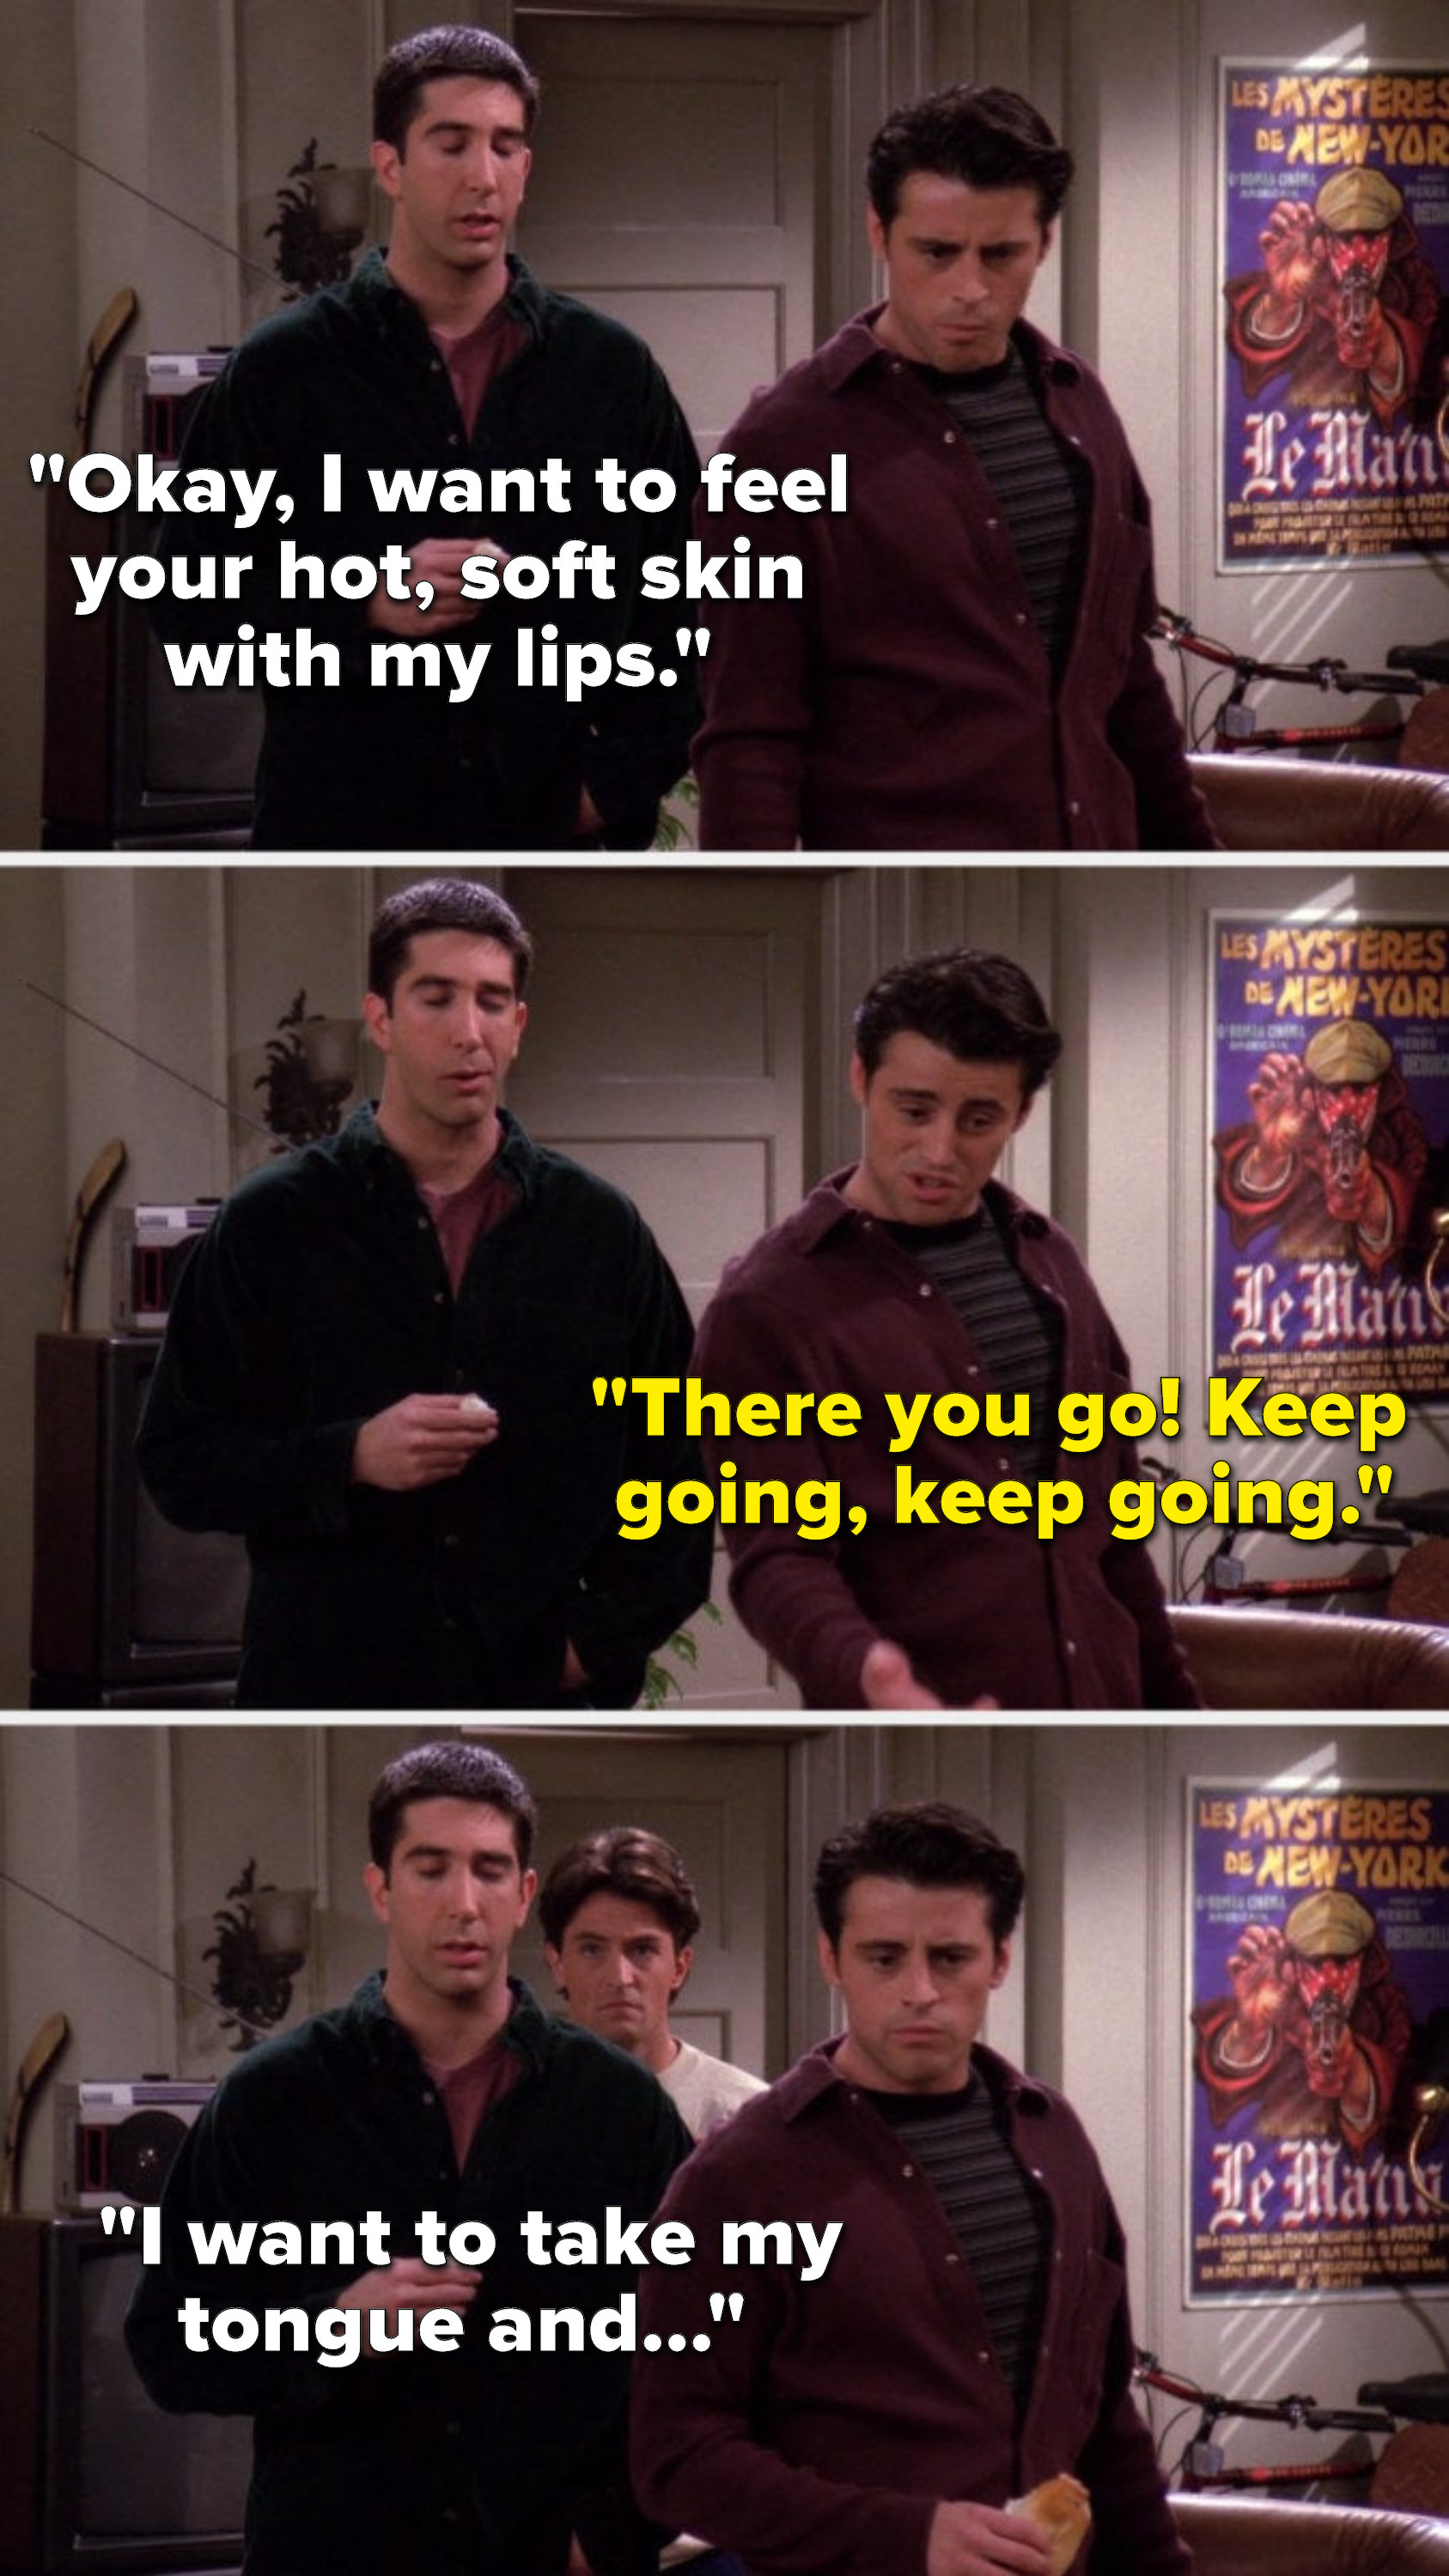 Ross says, &quot;Okay, I want to feel your hot, soft skin with my lips,&quot; Joey says, &quot;There you go, keep going, keep going,&quot; and Chandler comes out of his room and listens as Ross says, &quot;I want to take my tongue and&quot;